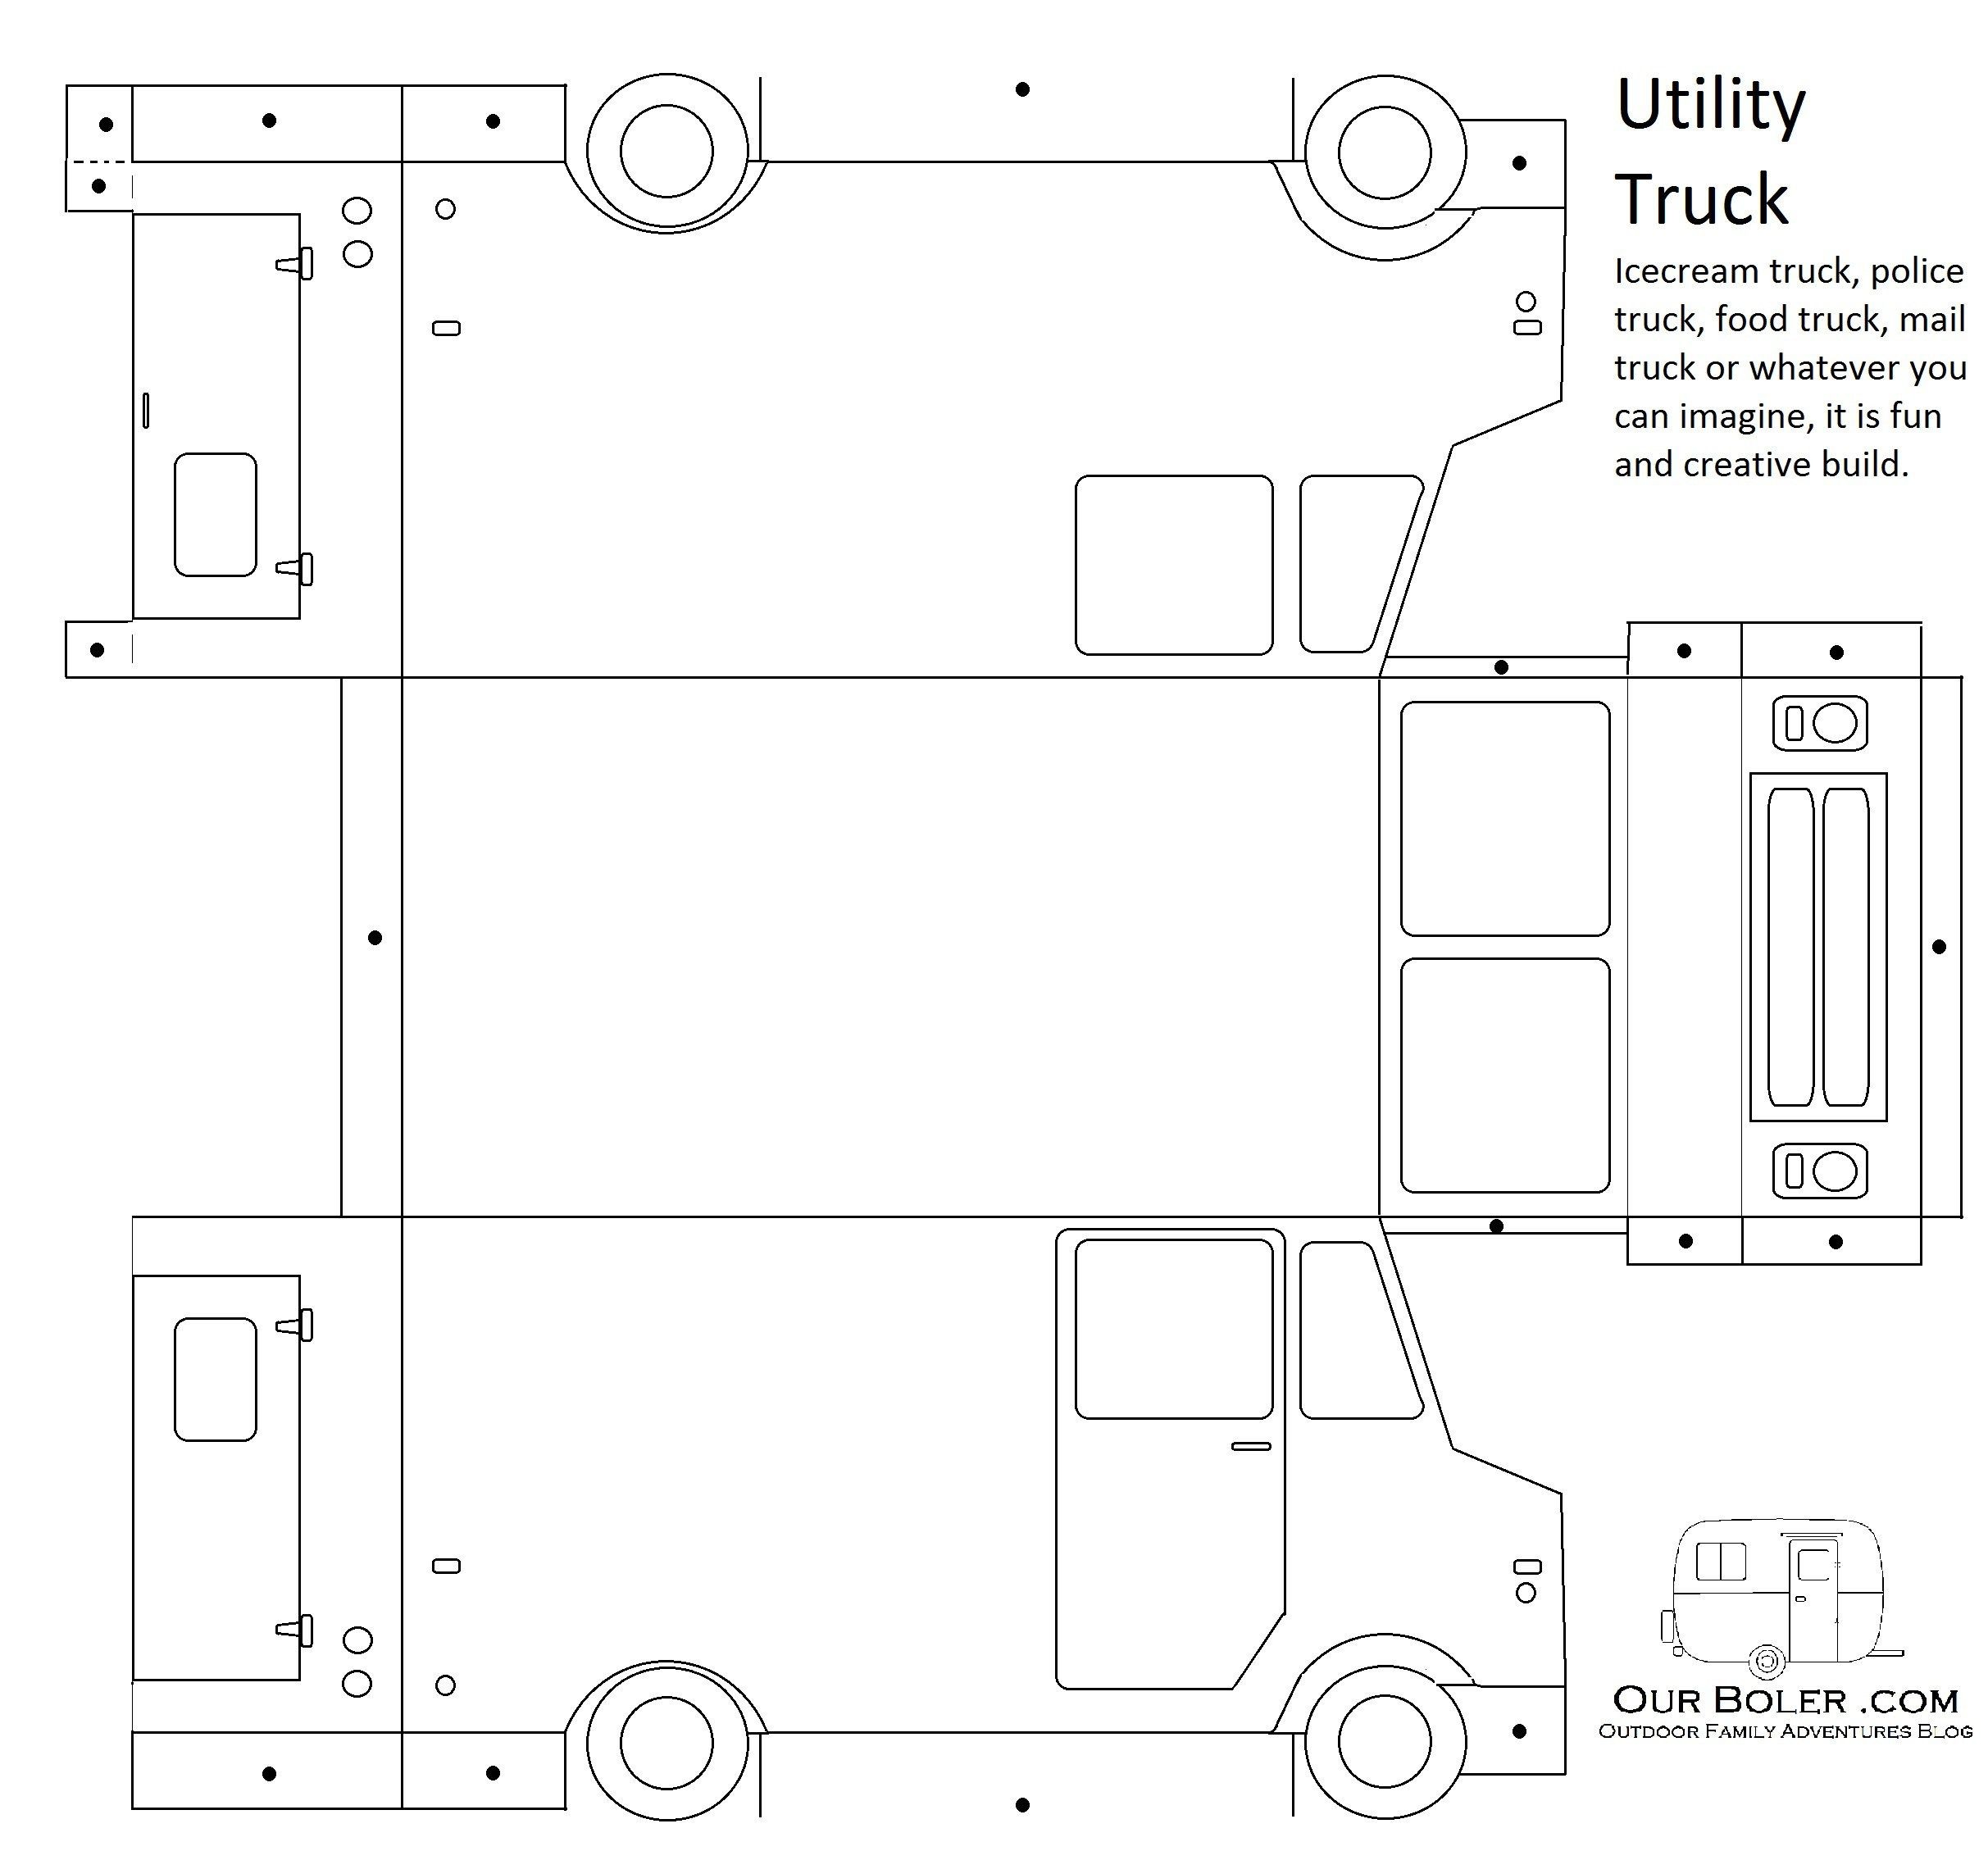 Food Truck Diagram Utility Work Truck Great for Ice Cream Food Police or Mail Of Food Truck Diagram